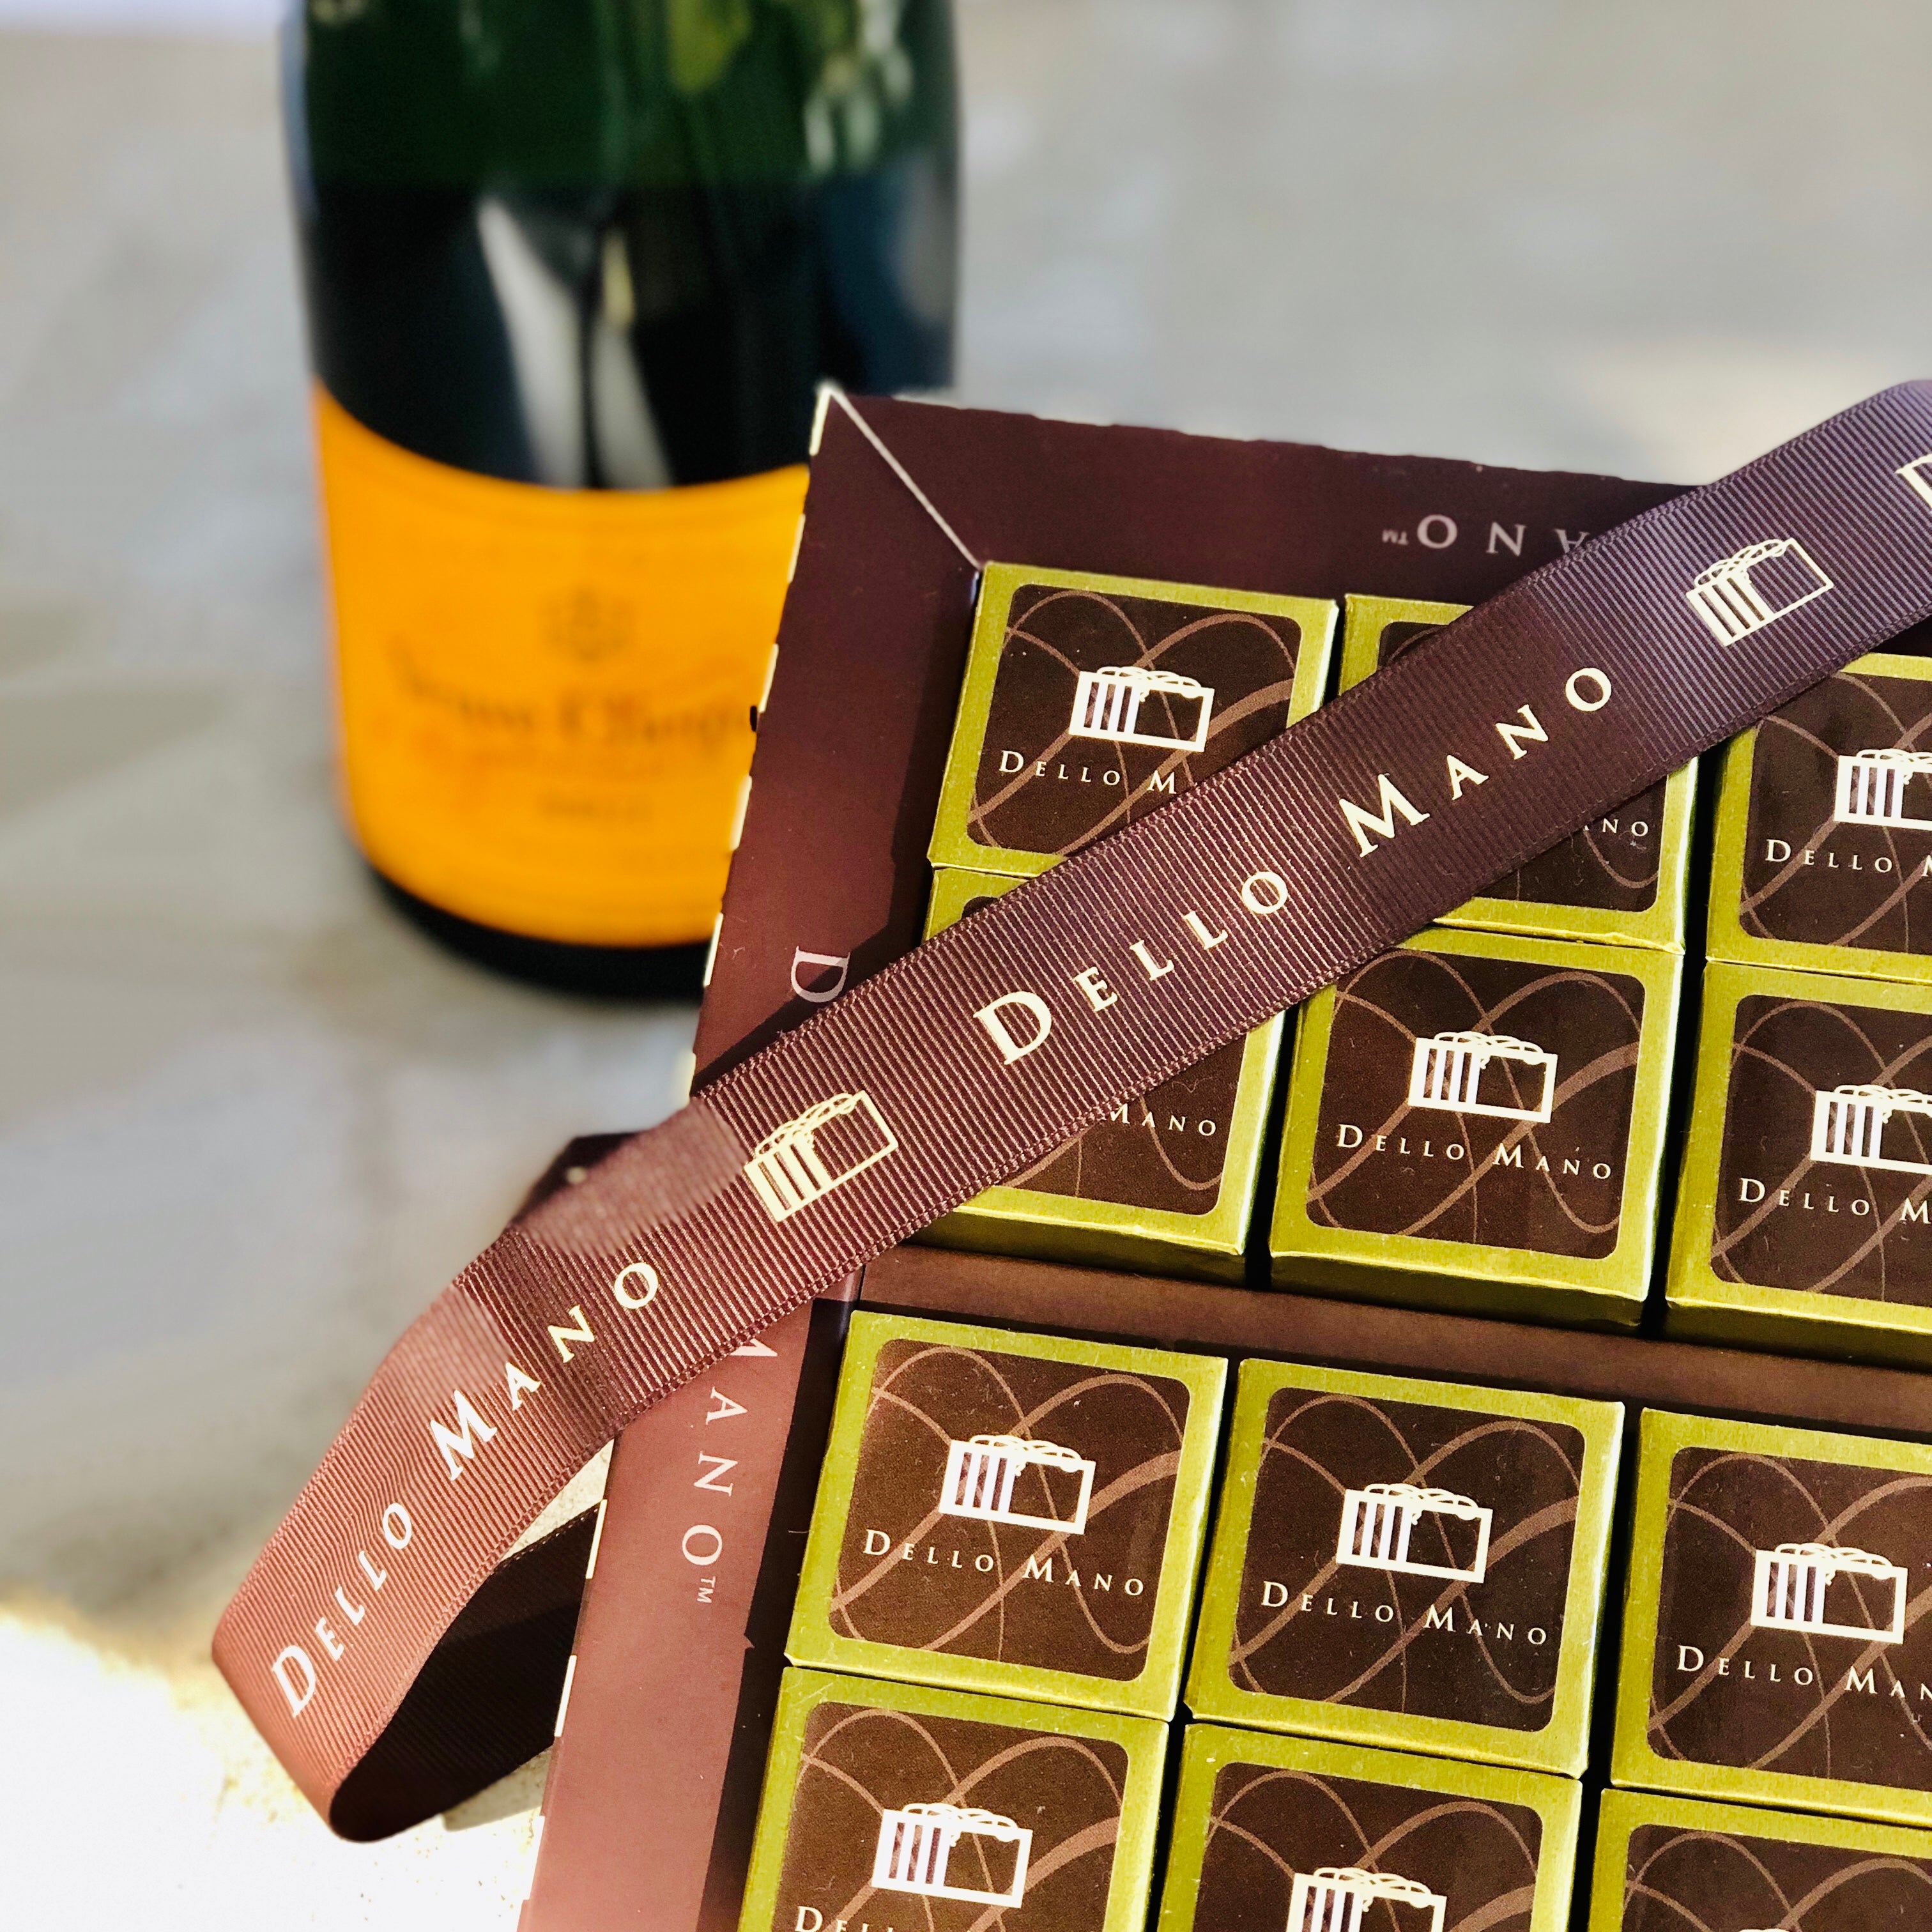 A champagne bottle with brownies. The Champagne bottle has an orange label and is blurred in the background . The gold foiled brownies have a brown ribbon across them and the ribbon says Dello Mano